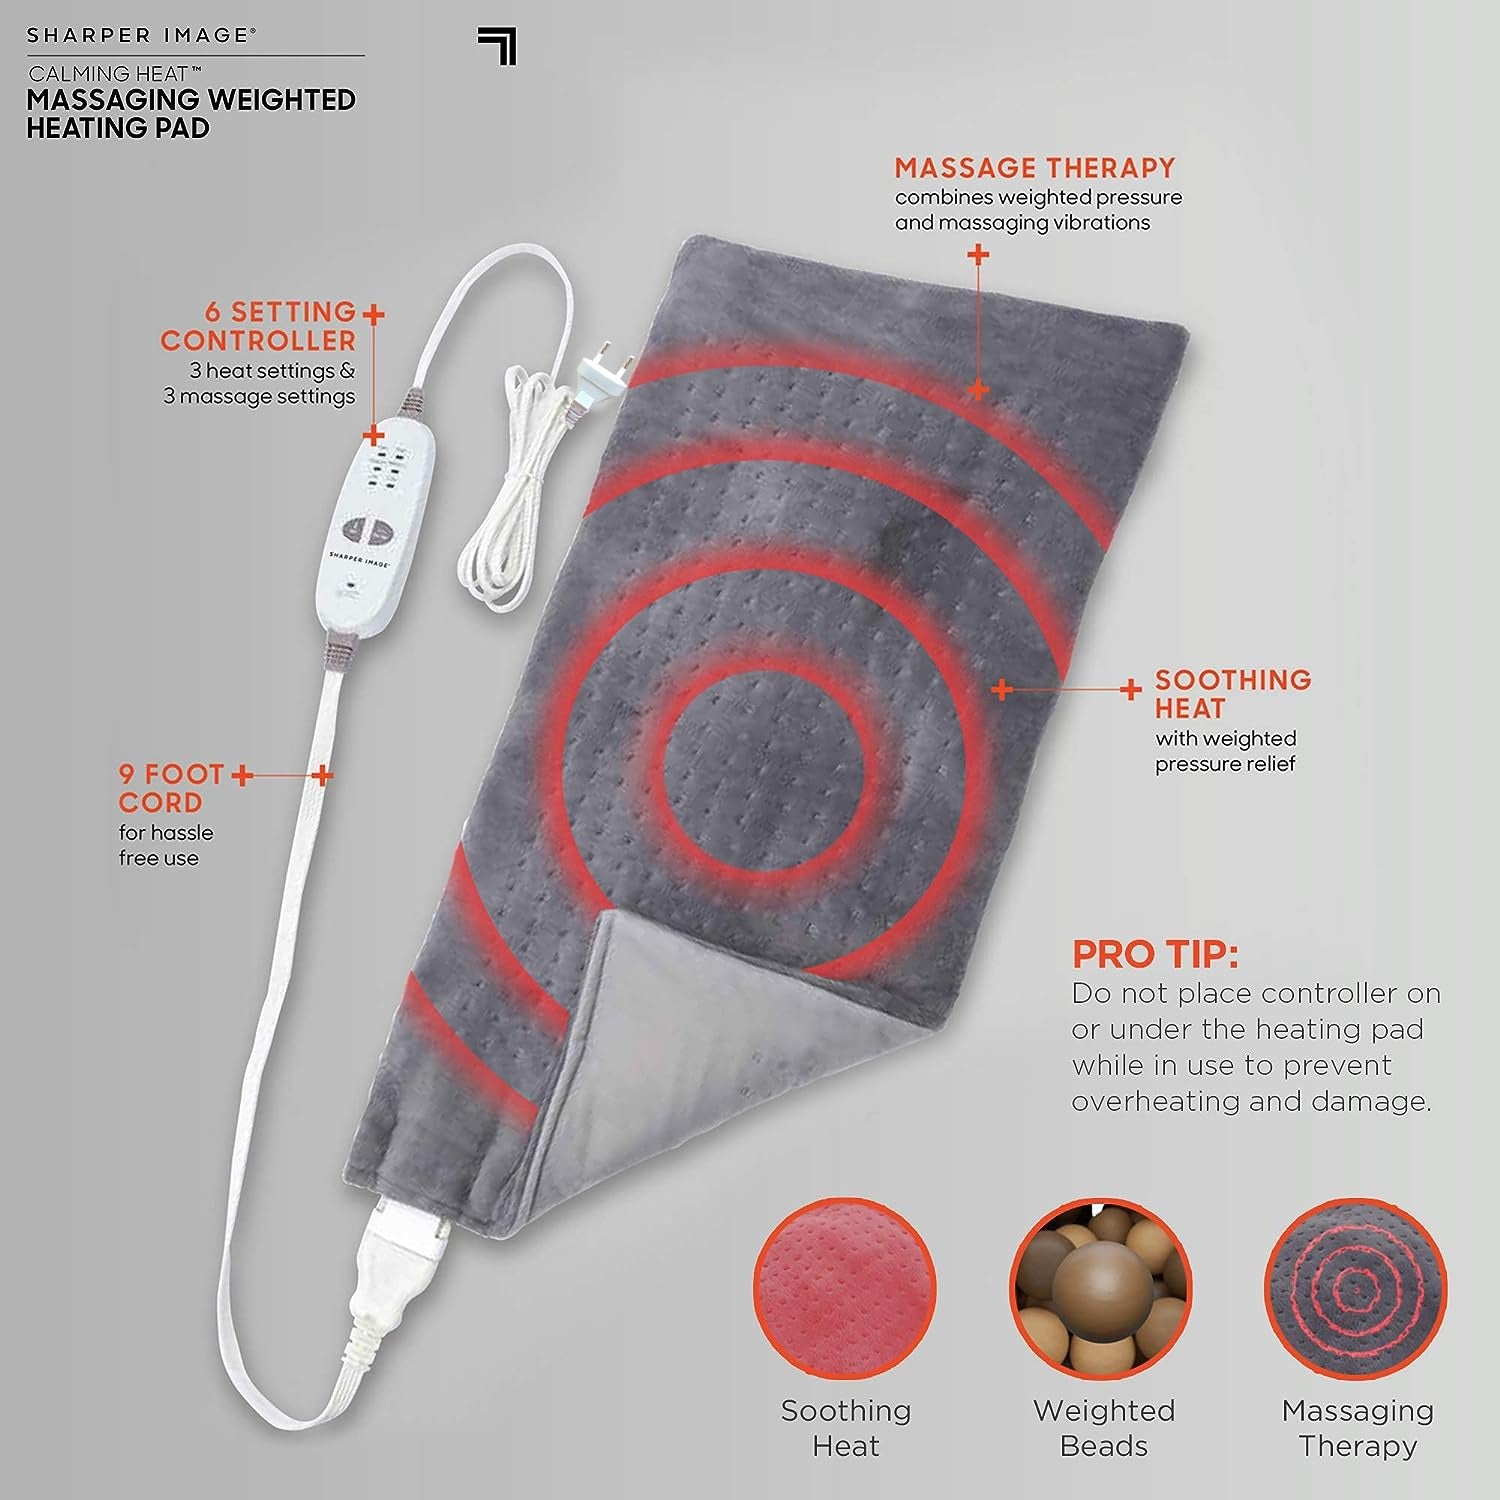 Showcasing Massaging Weighted Heating Pad with its features and functions